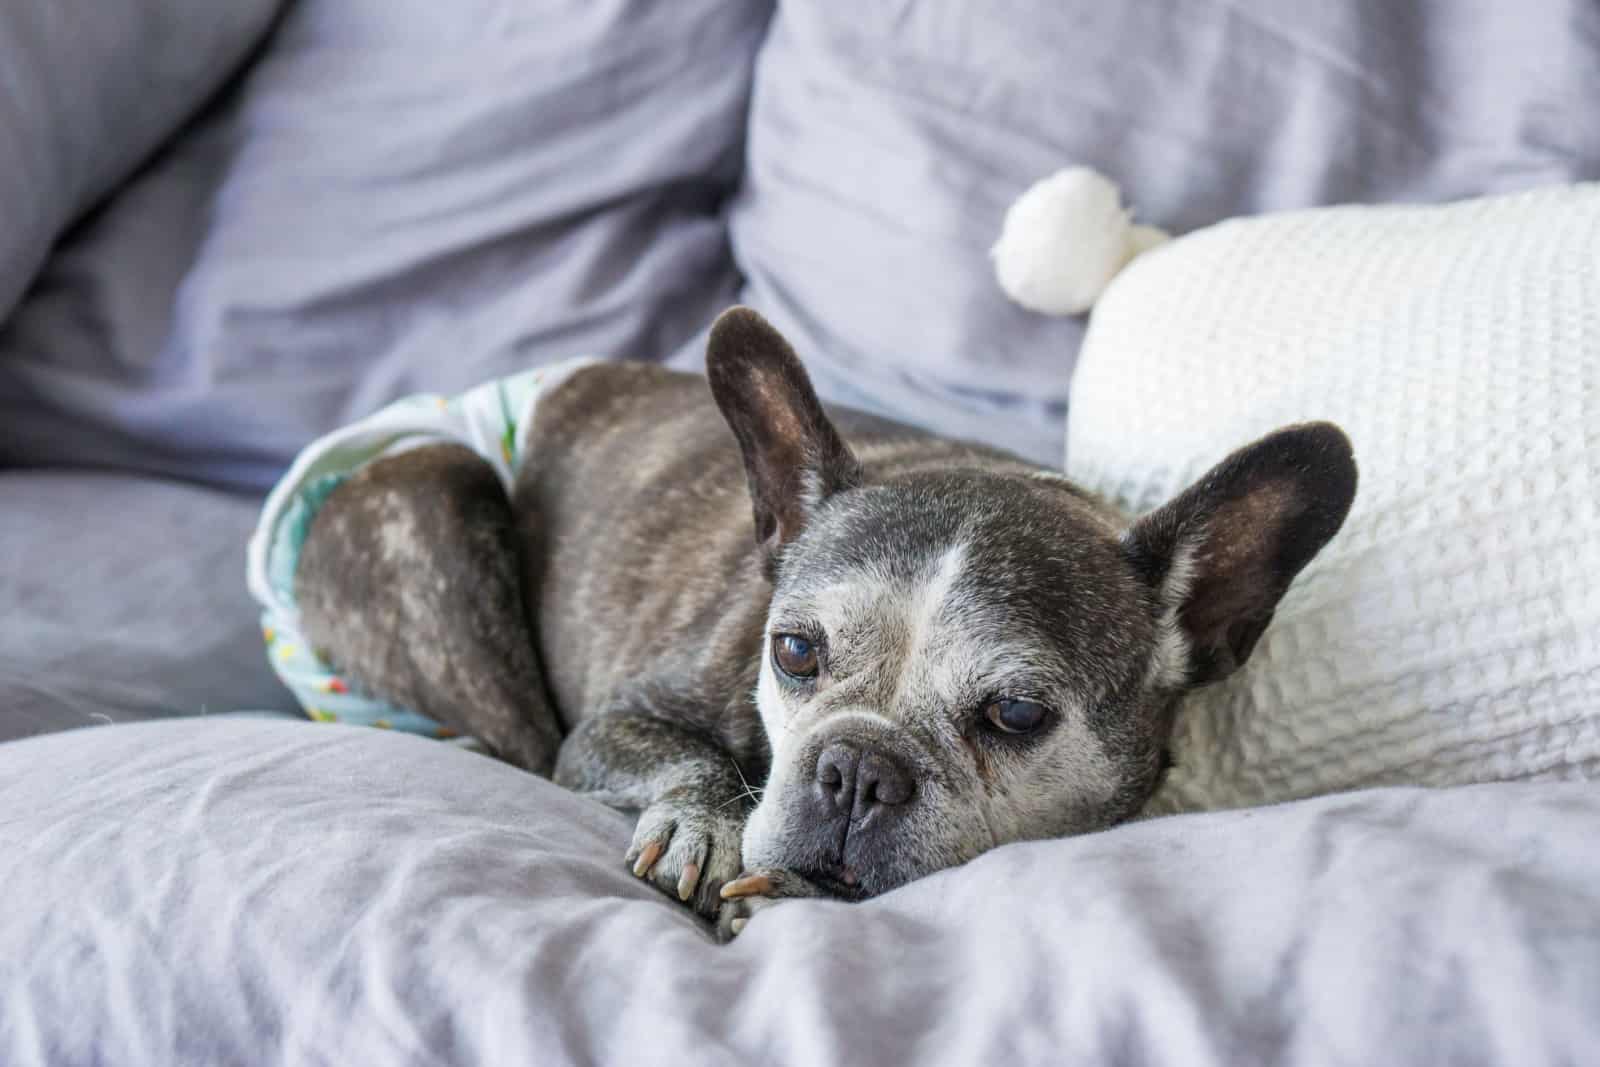 Elderly French Bulldog wearing diapers and sleeping on the couch